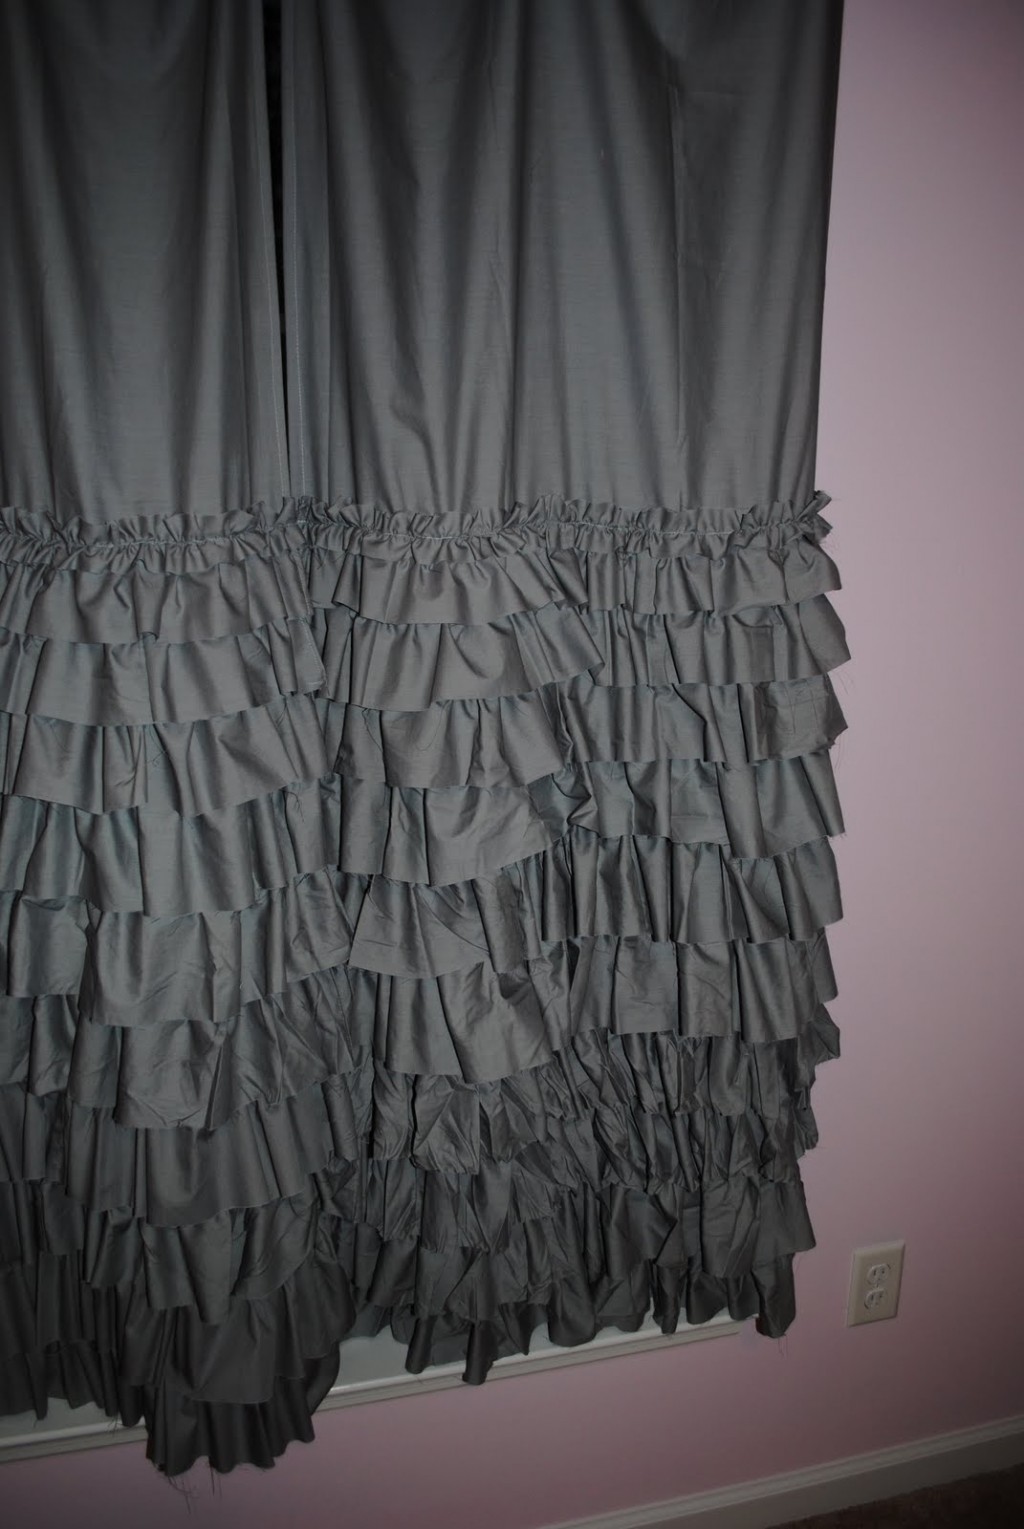 Layered Curtains in Curtain